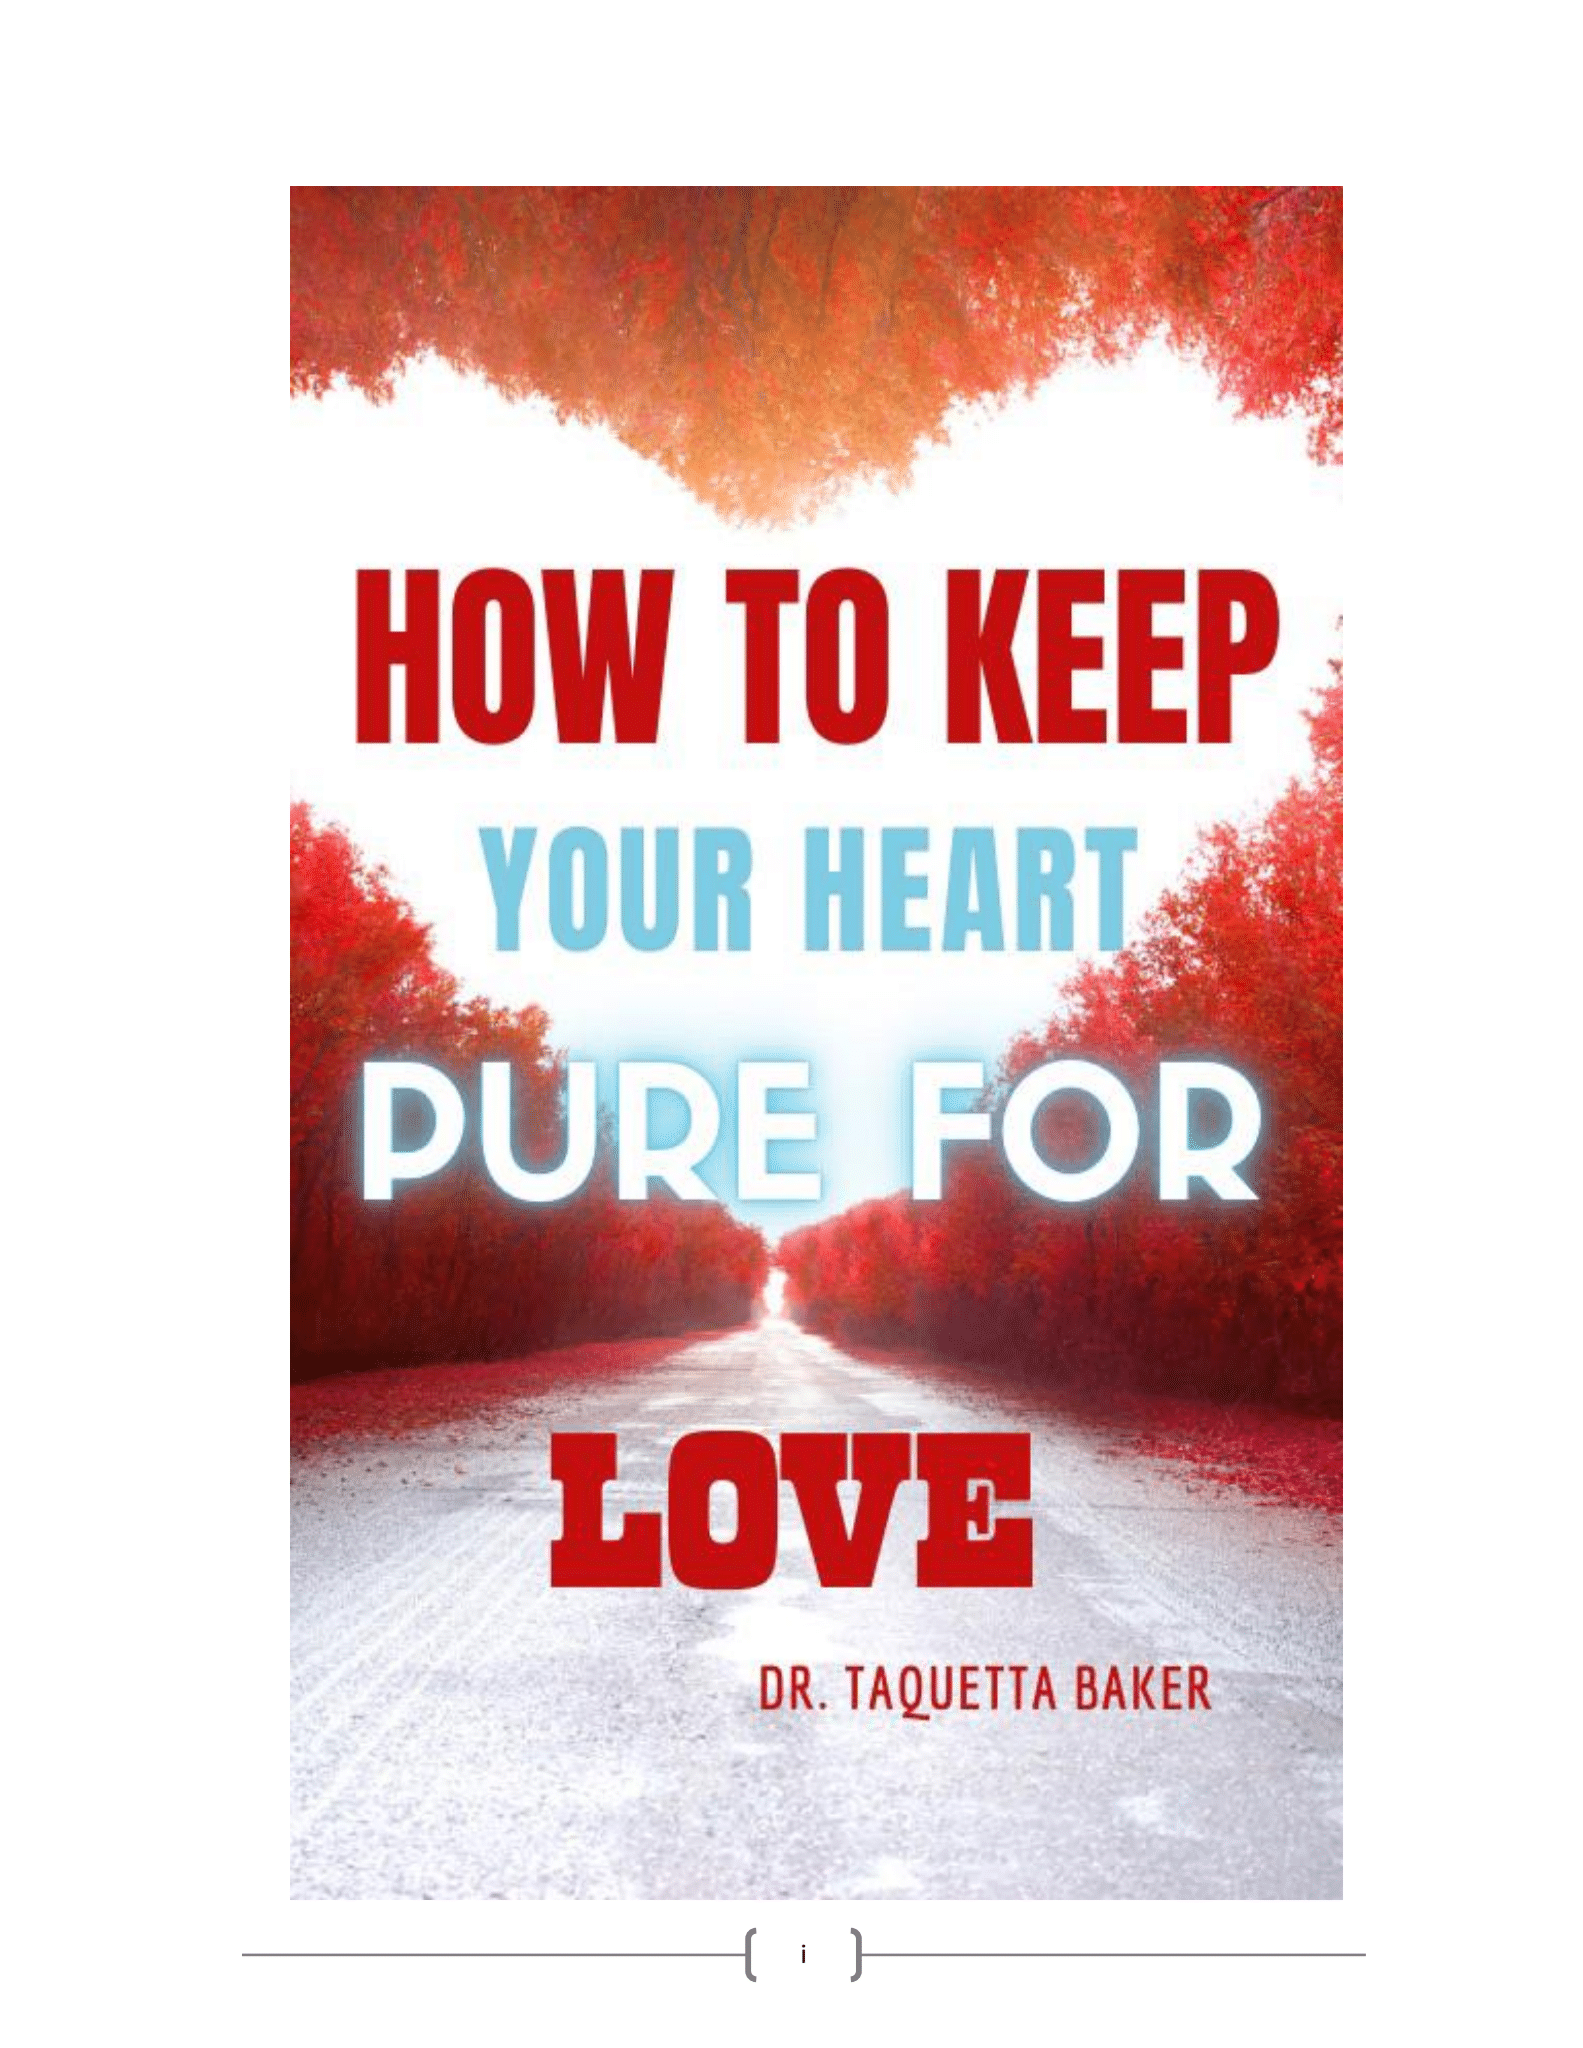 How to Keep Your Heart Pure for Love